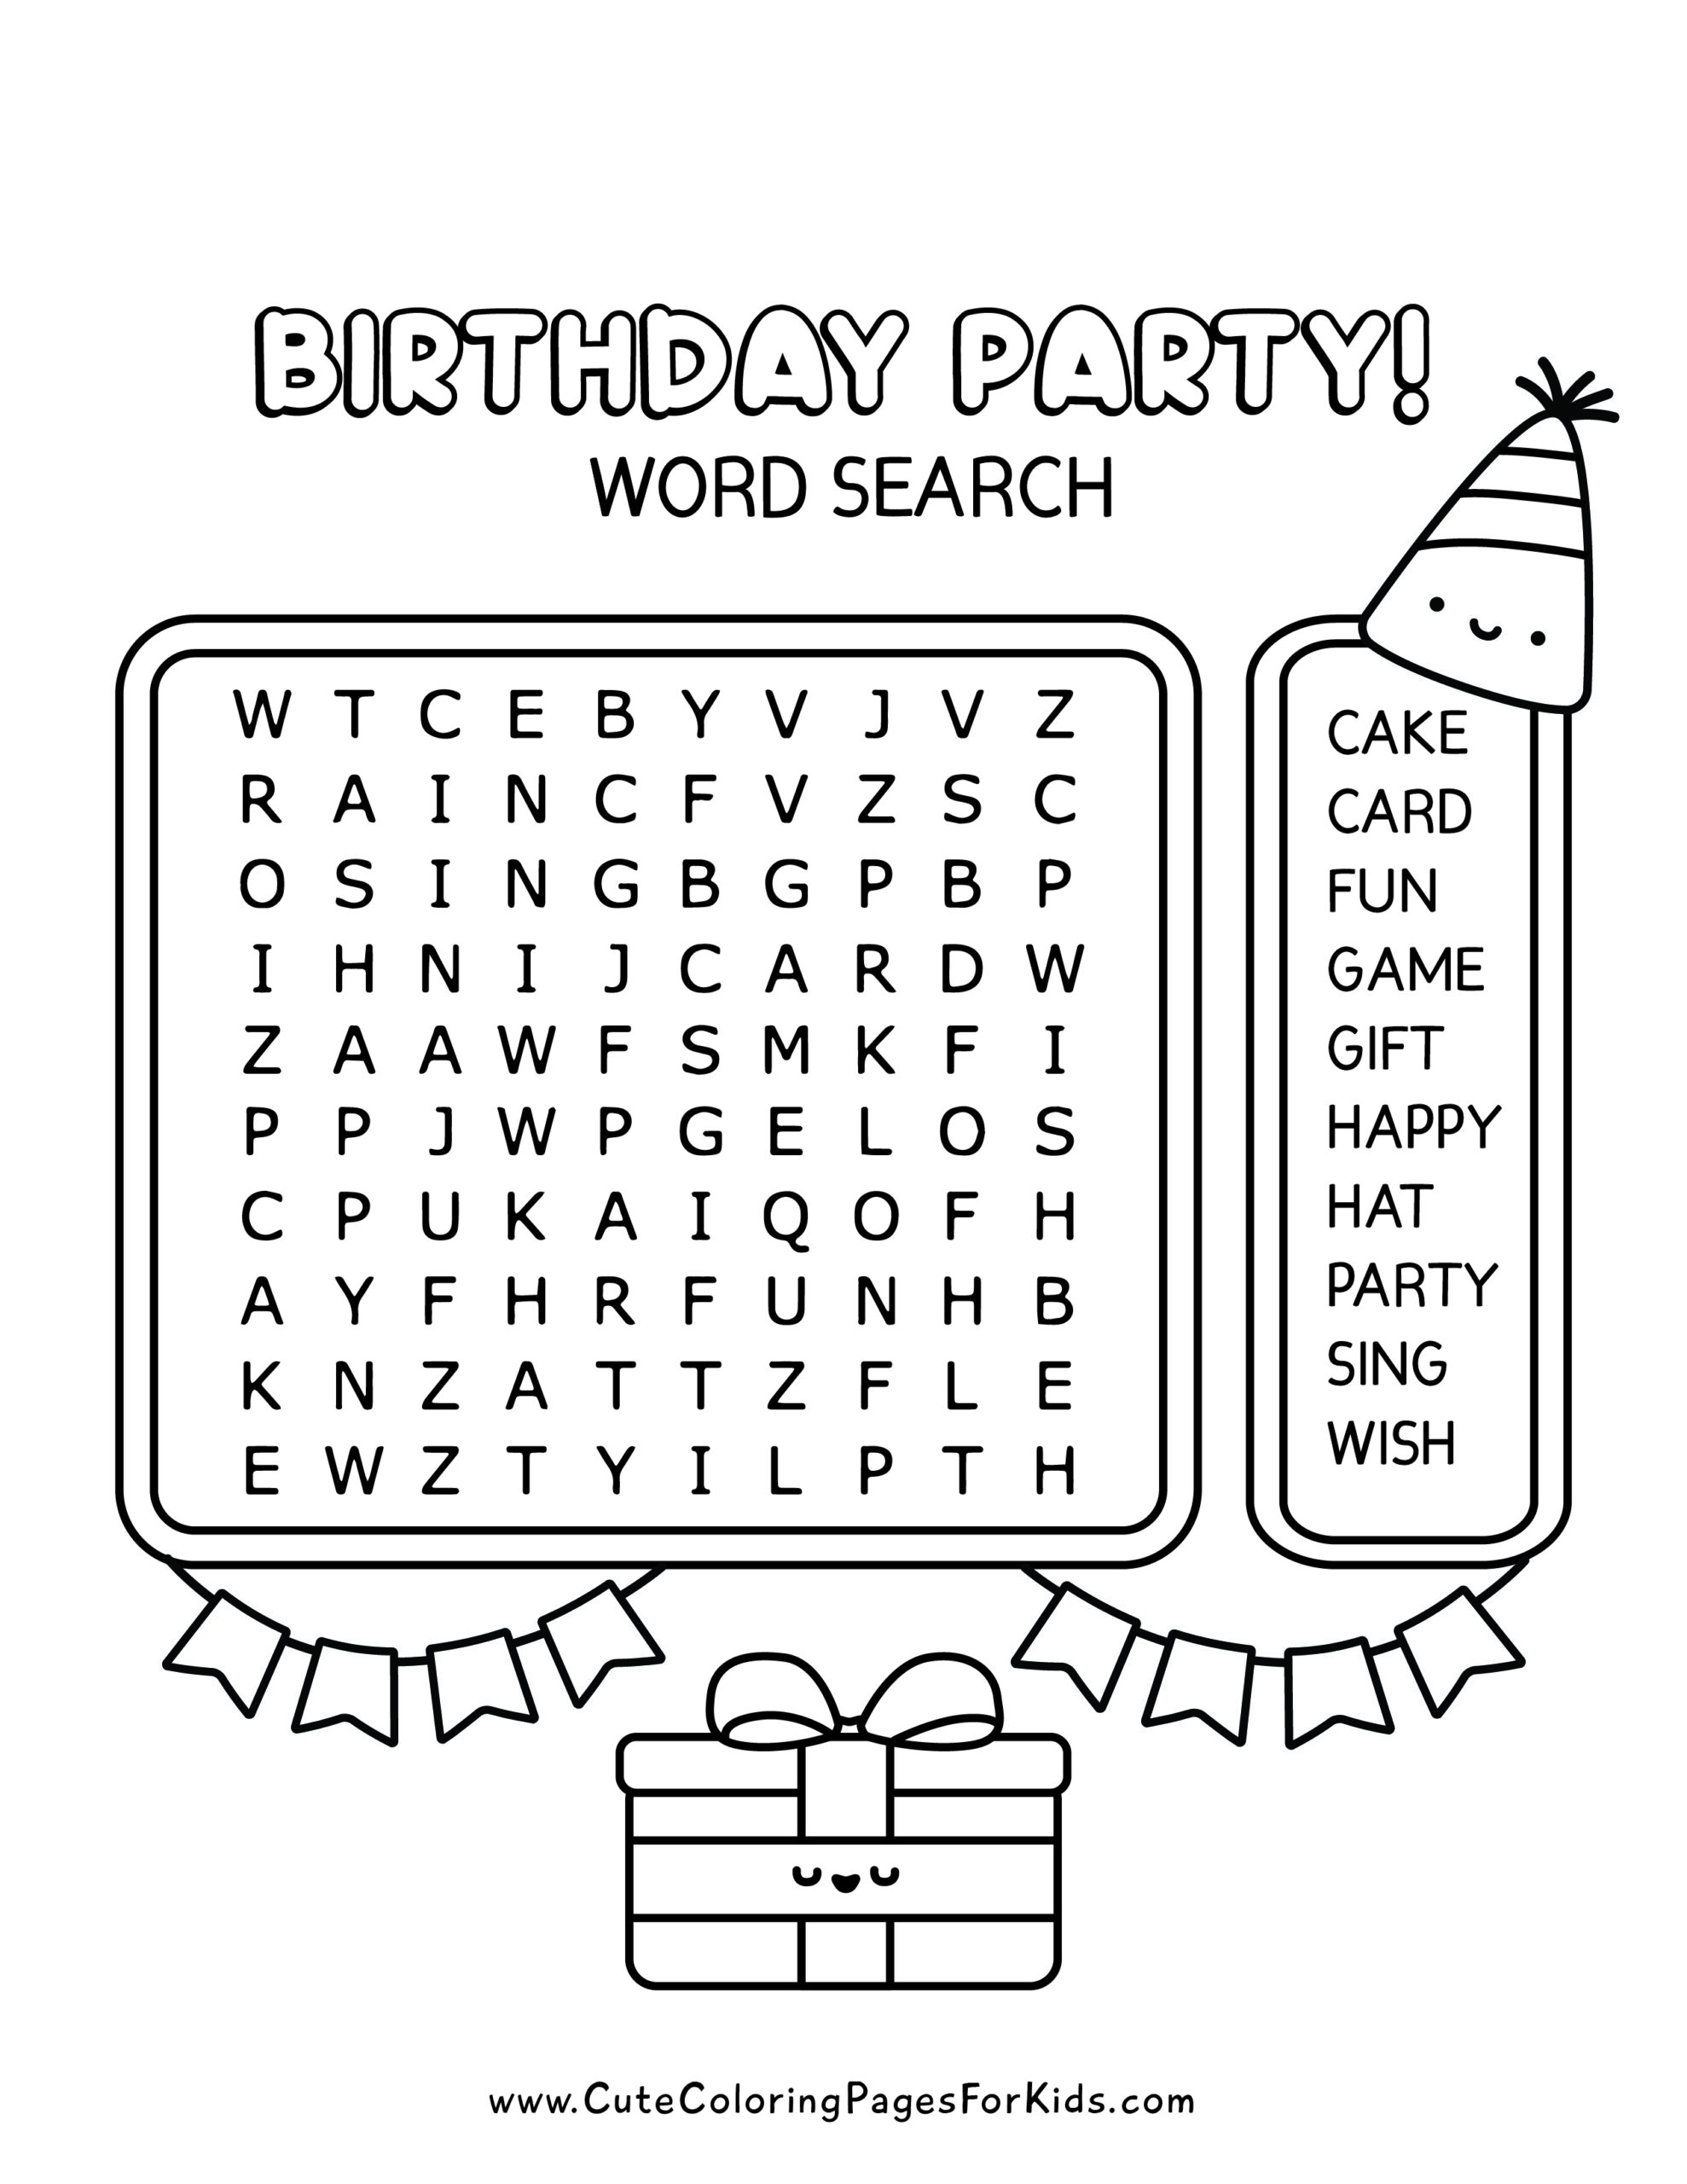 Cake Word Search Puzzle Worksheet Activity, Morning Work, Brain Games